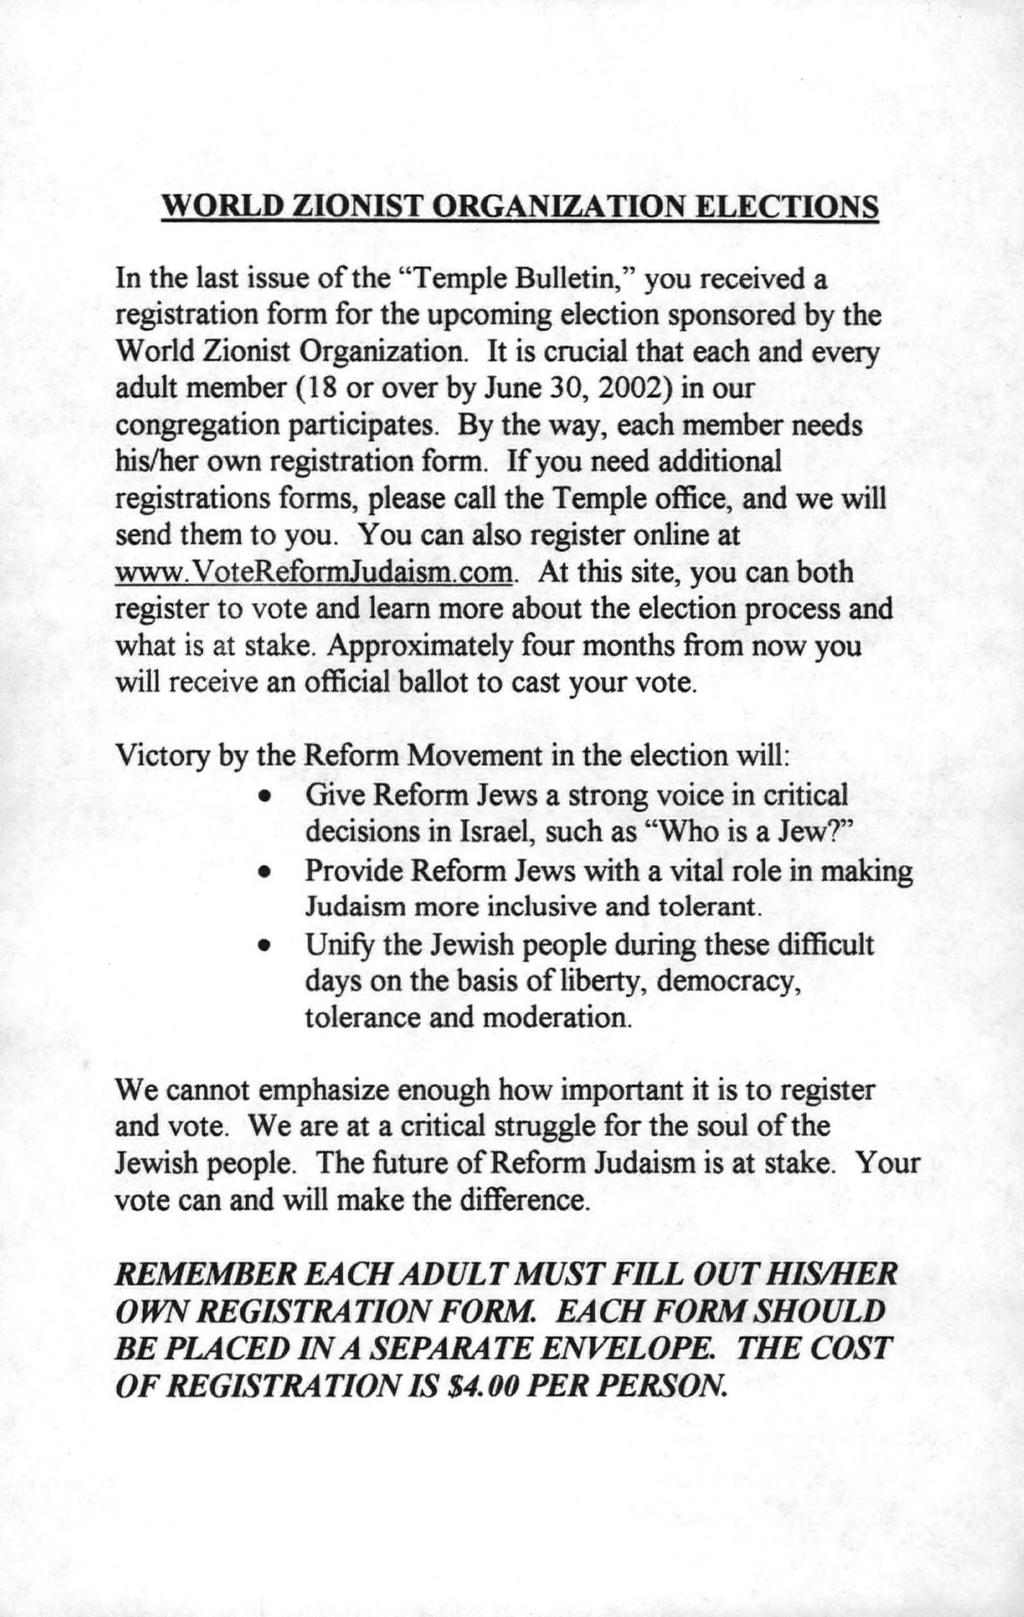 WORLD ZIONIST ORGANIZATION ELECTIONS In the last issue of the "Temple Bulletin," you received a registration form for the upcoming election sponsored by the World Zionist Organization.